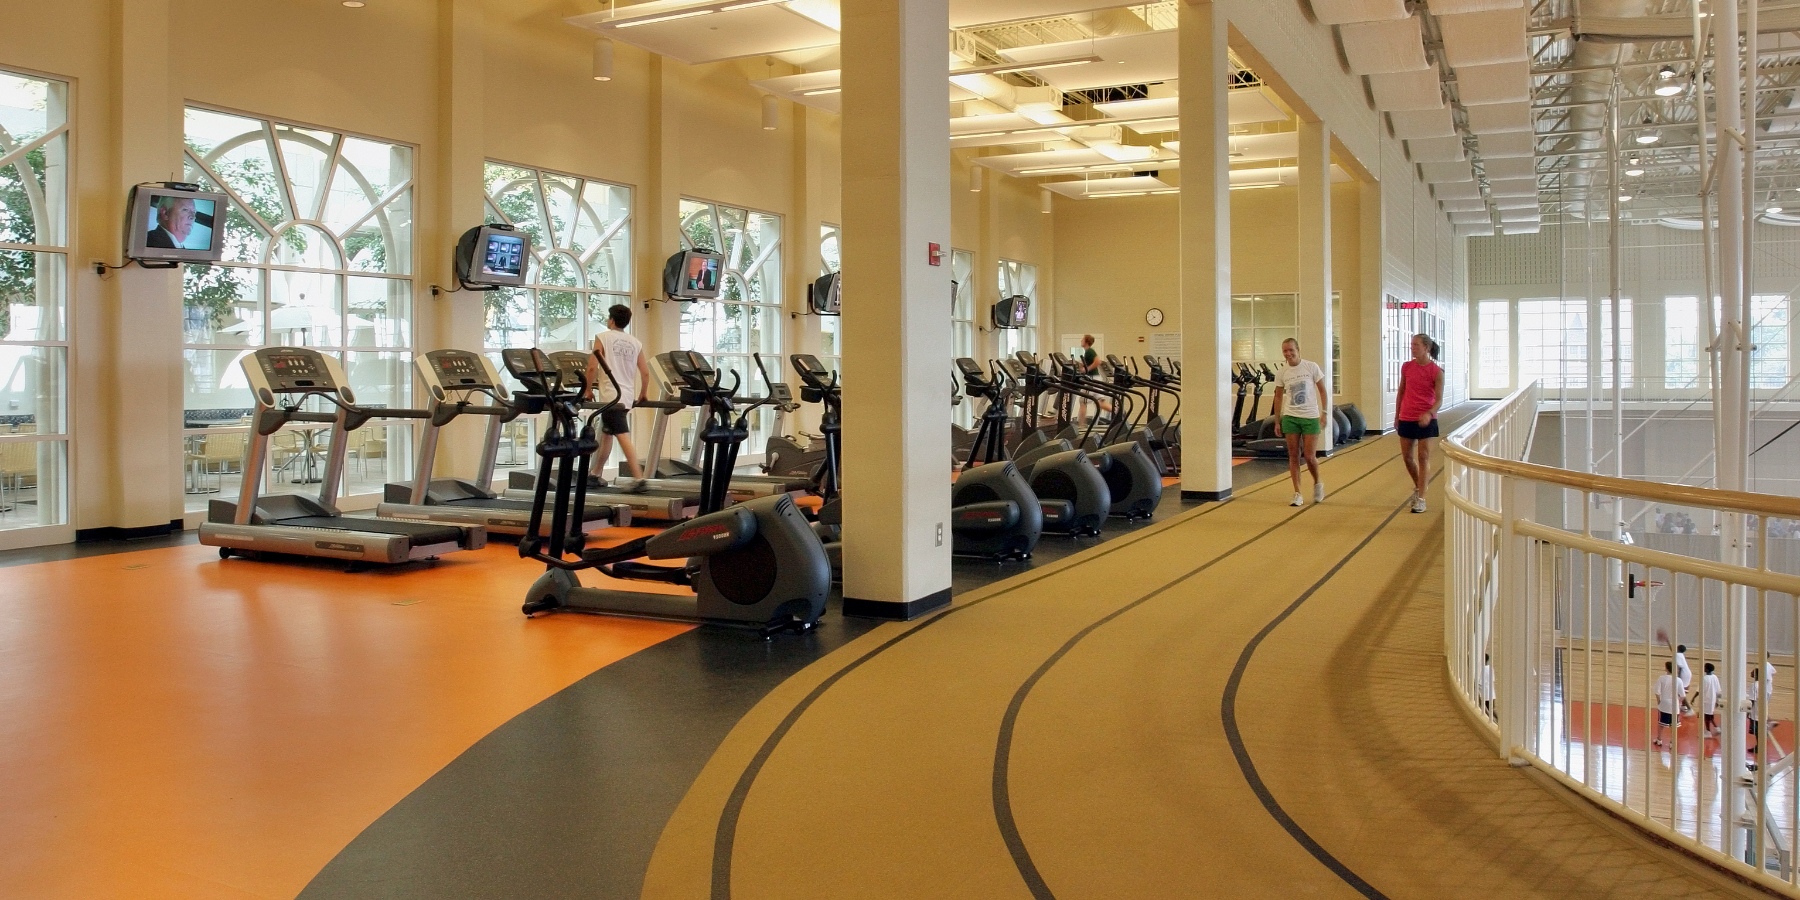 walking track, elliptical machines and treadmills in the fitness center